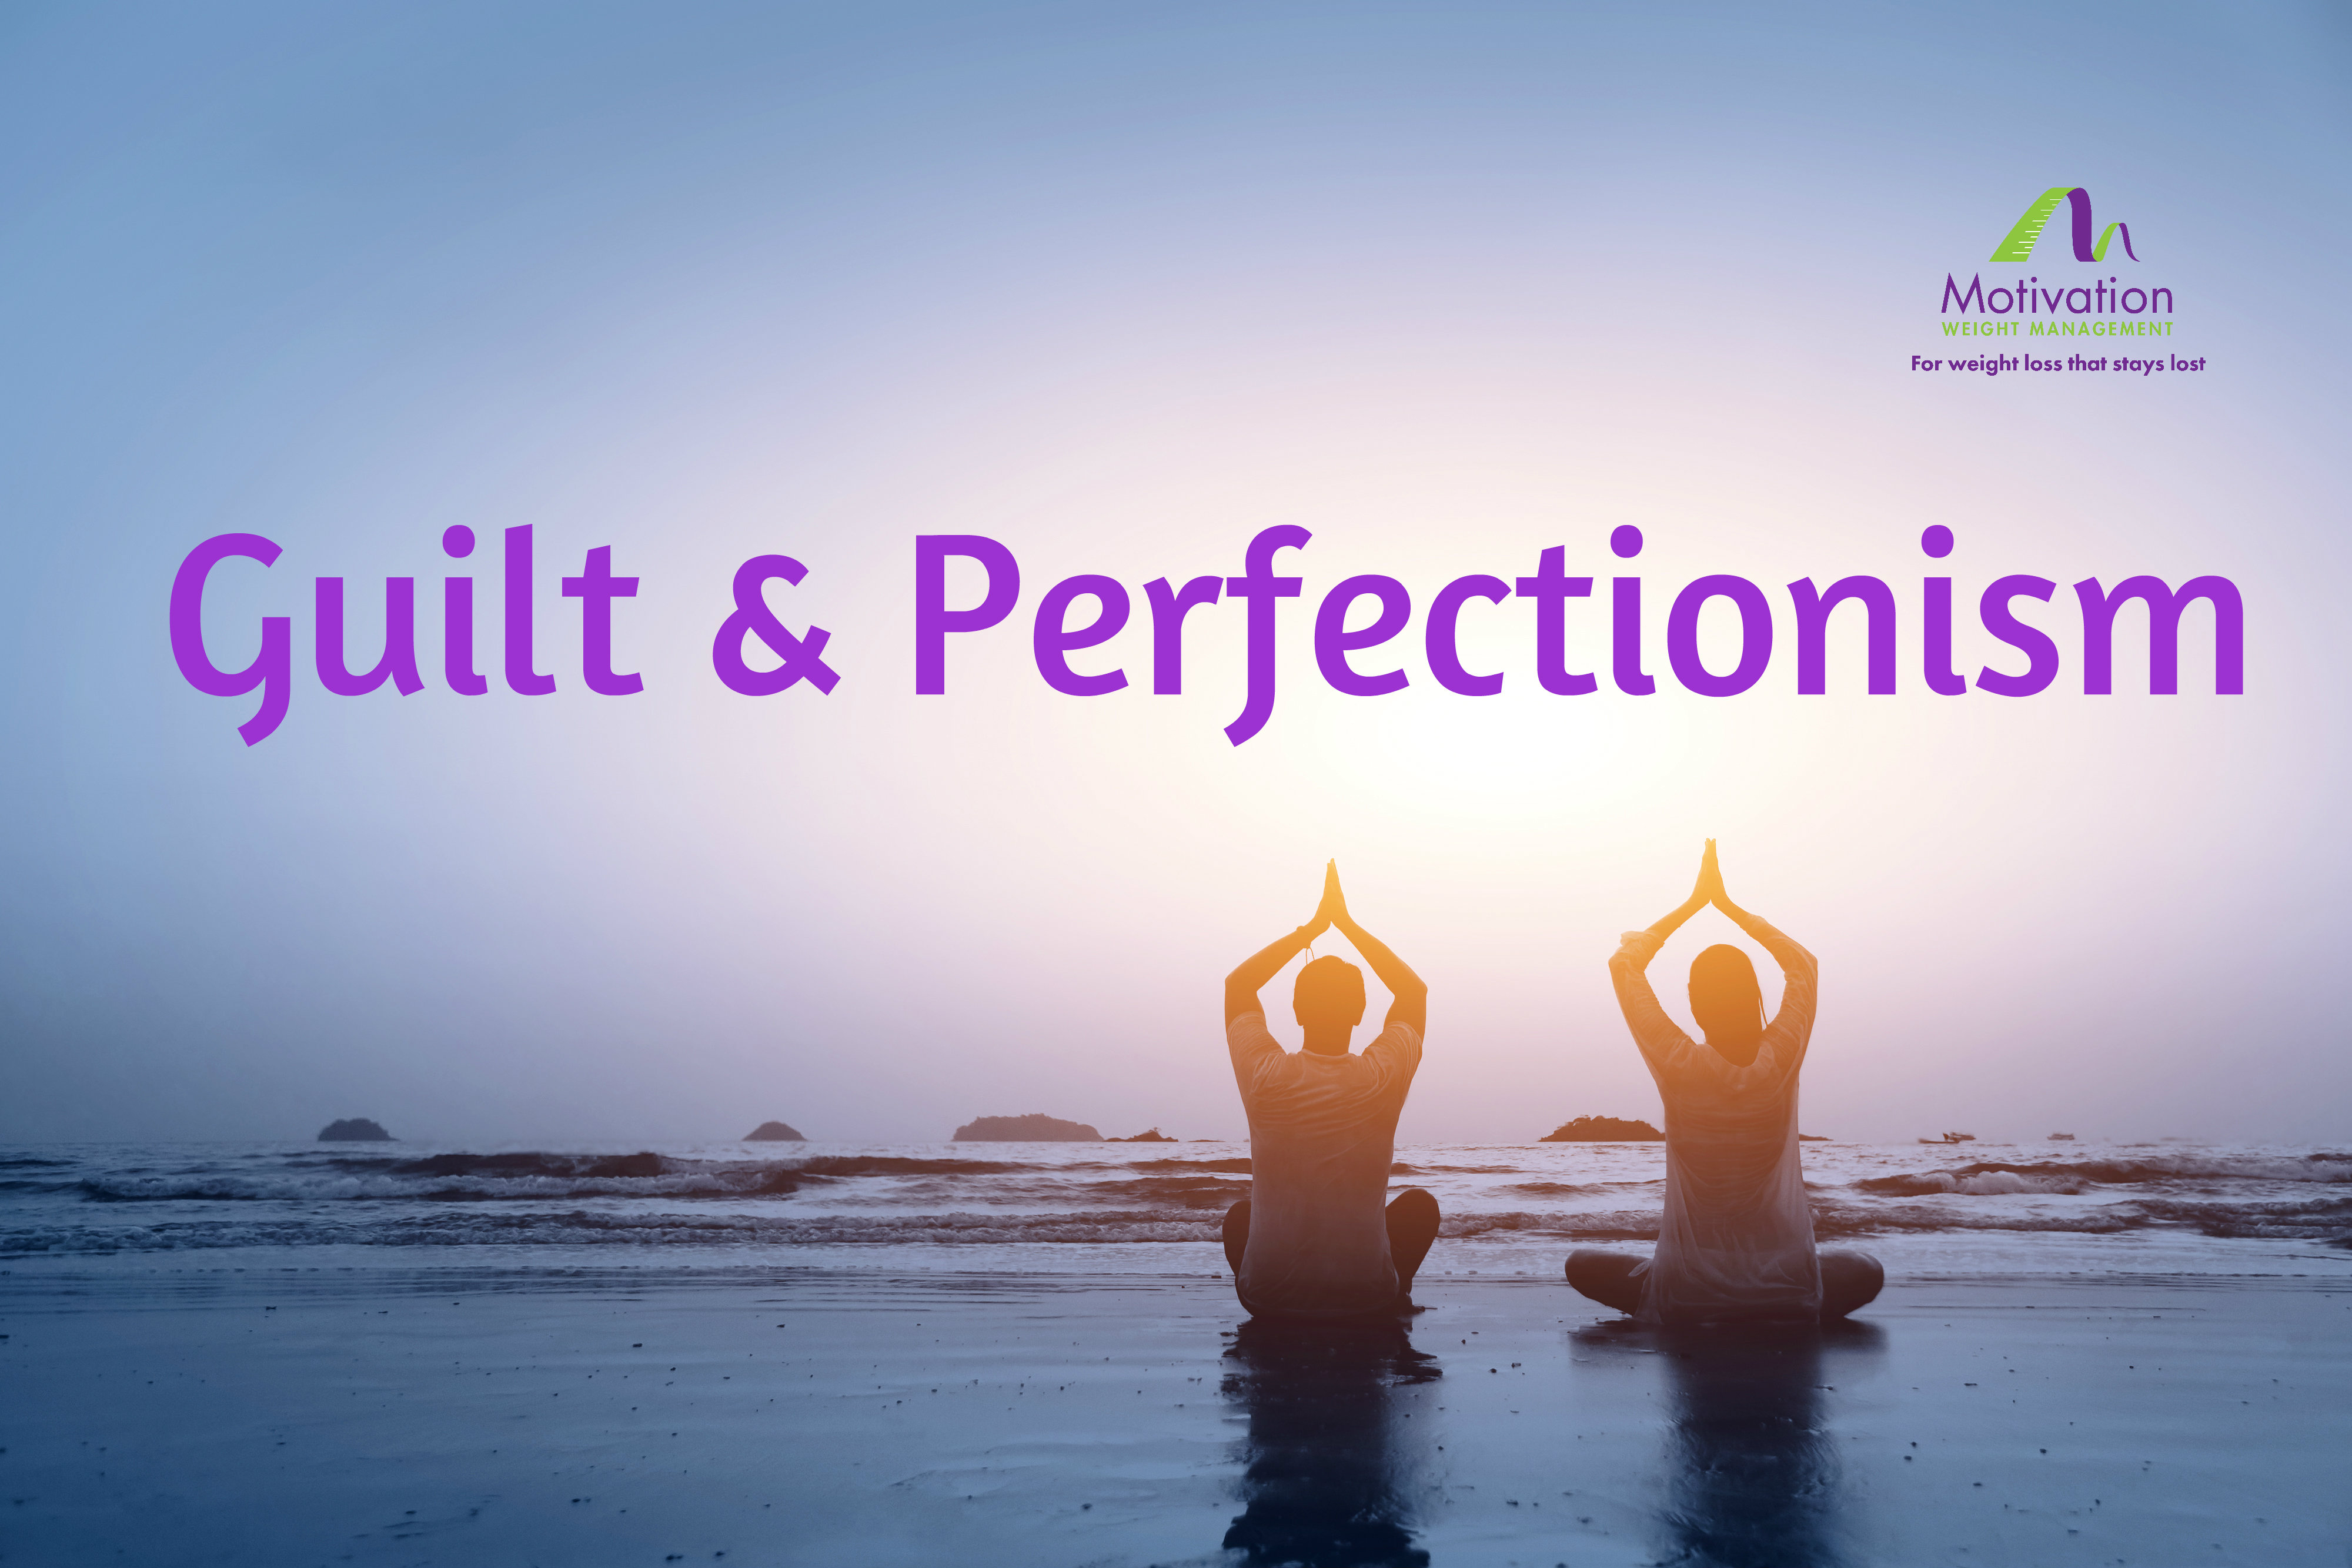 Day 18 Guilt & Perfectionism